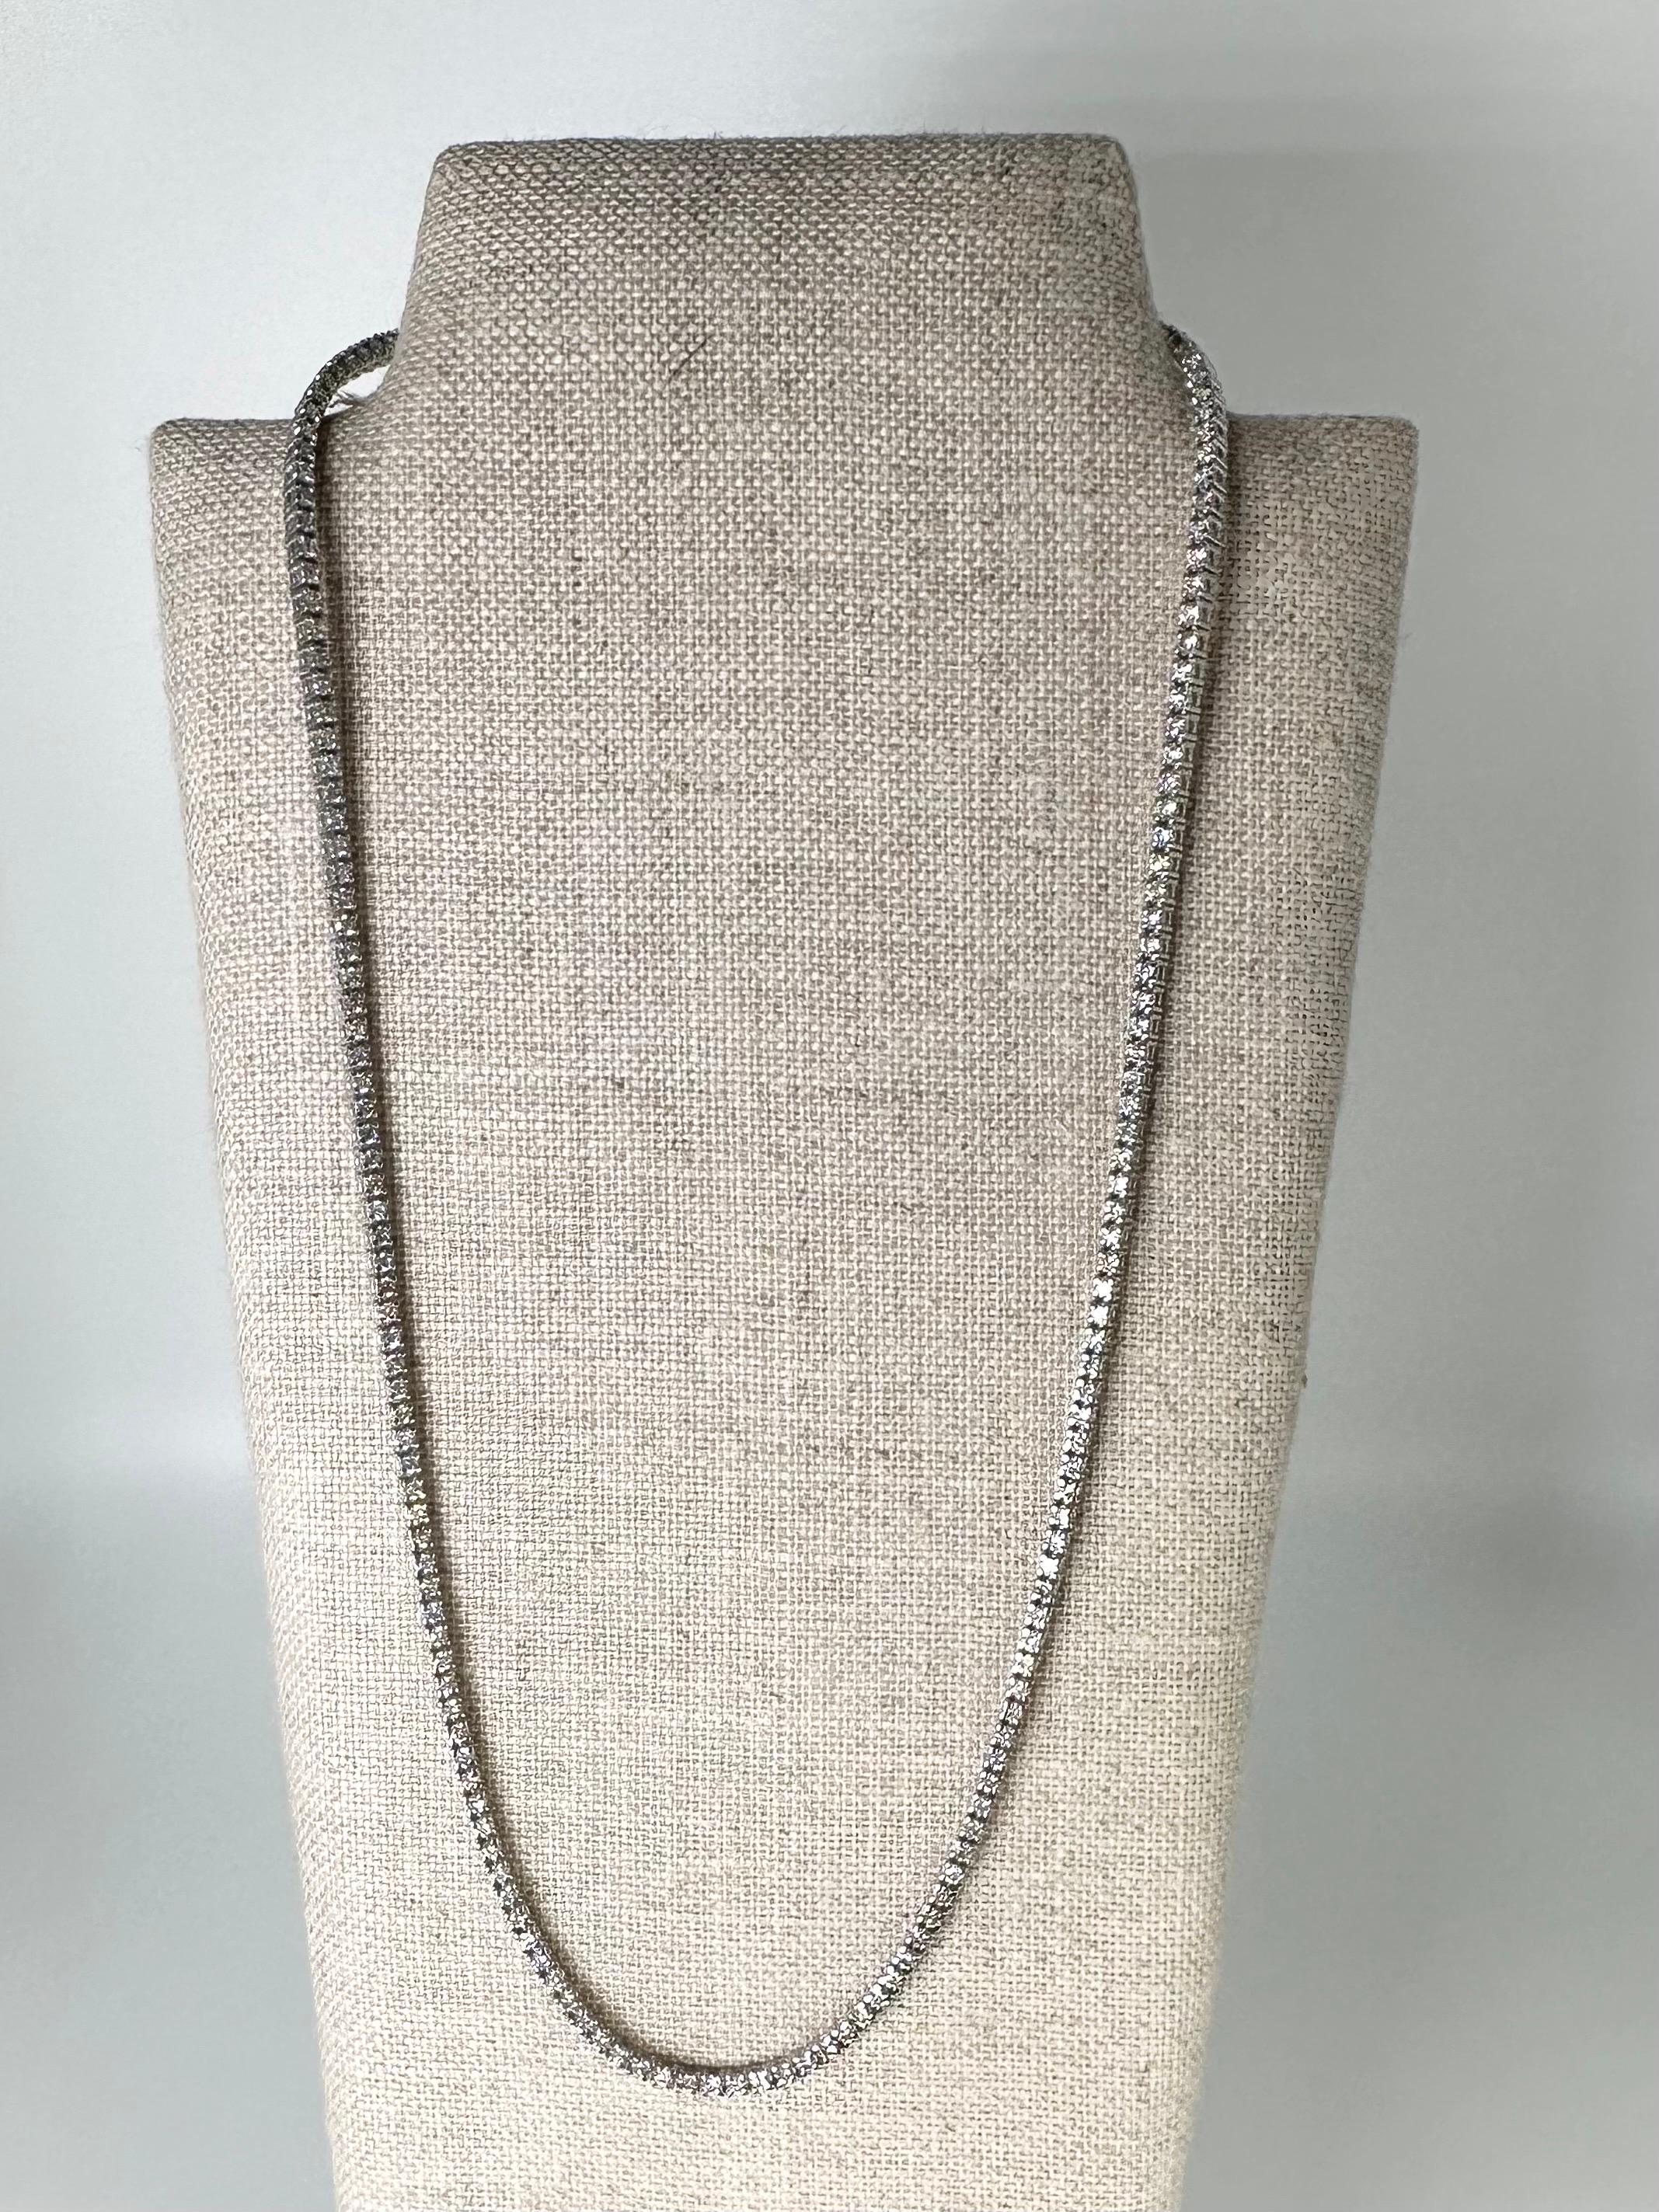 Classy tennis necklace with 3.51 carats of natural diamonds in 14KT white gold, this necklace is 16 inches! We absolutely love this necklace for how it sits on the neck, comfortable with the right amoung of luxury! Tennis necklaces this size go with